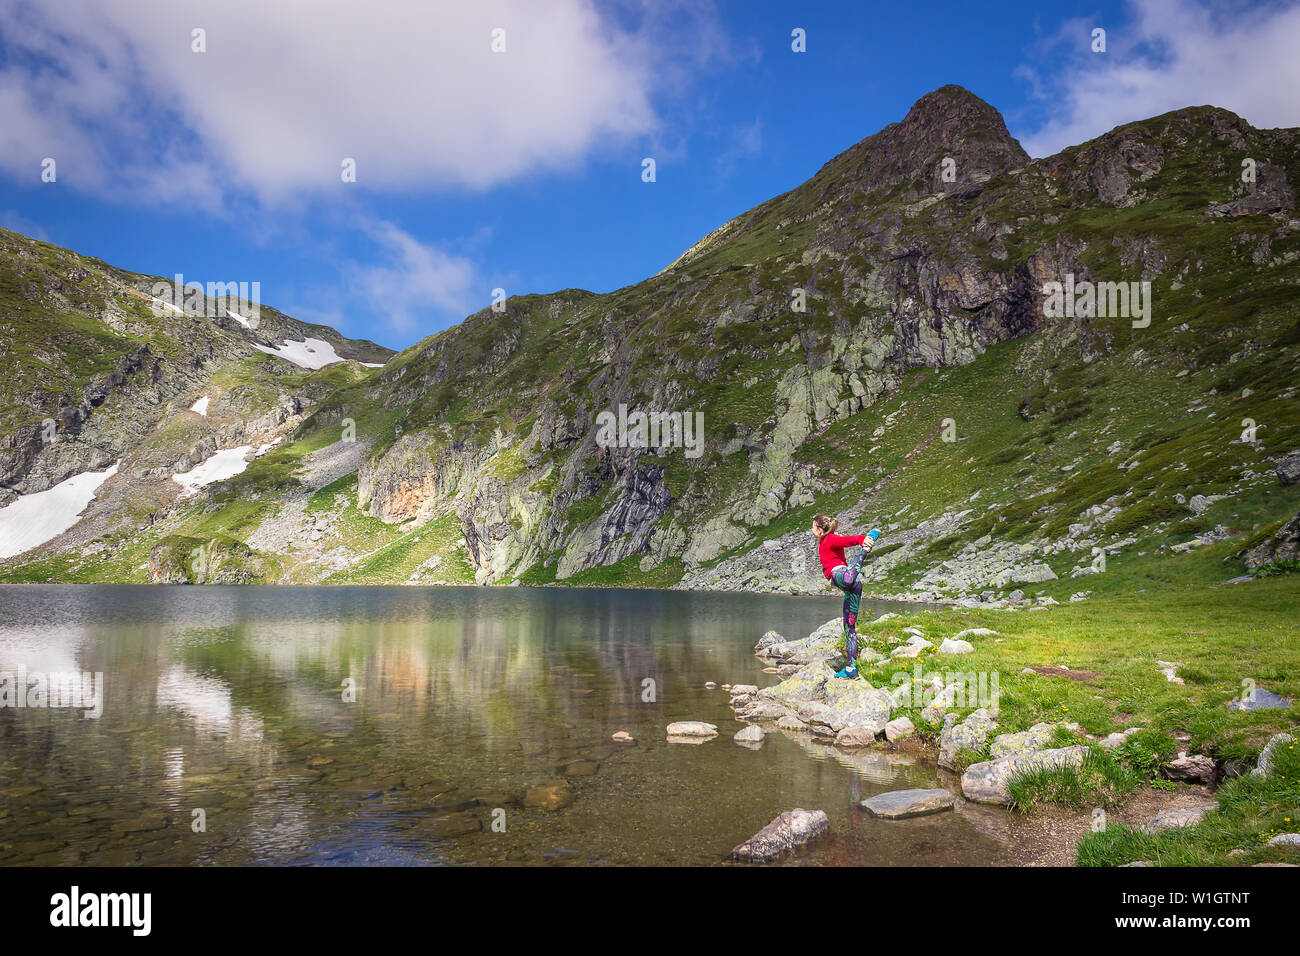 Girl with red jacket and colorful tights standing on one leg at the edge of beautiful Kidney lake on Rila mountain and epic, rocky peaks Stock Photo